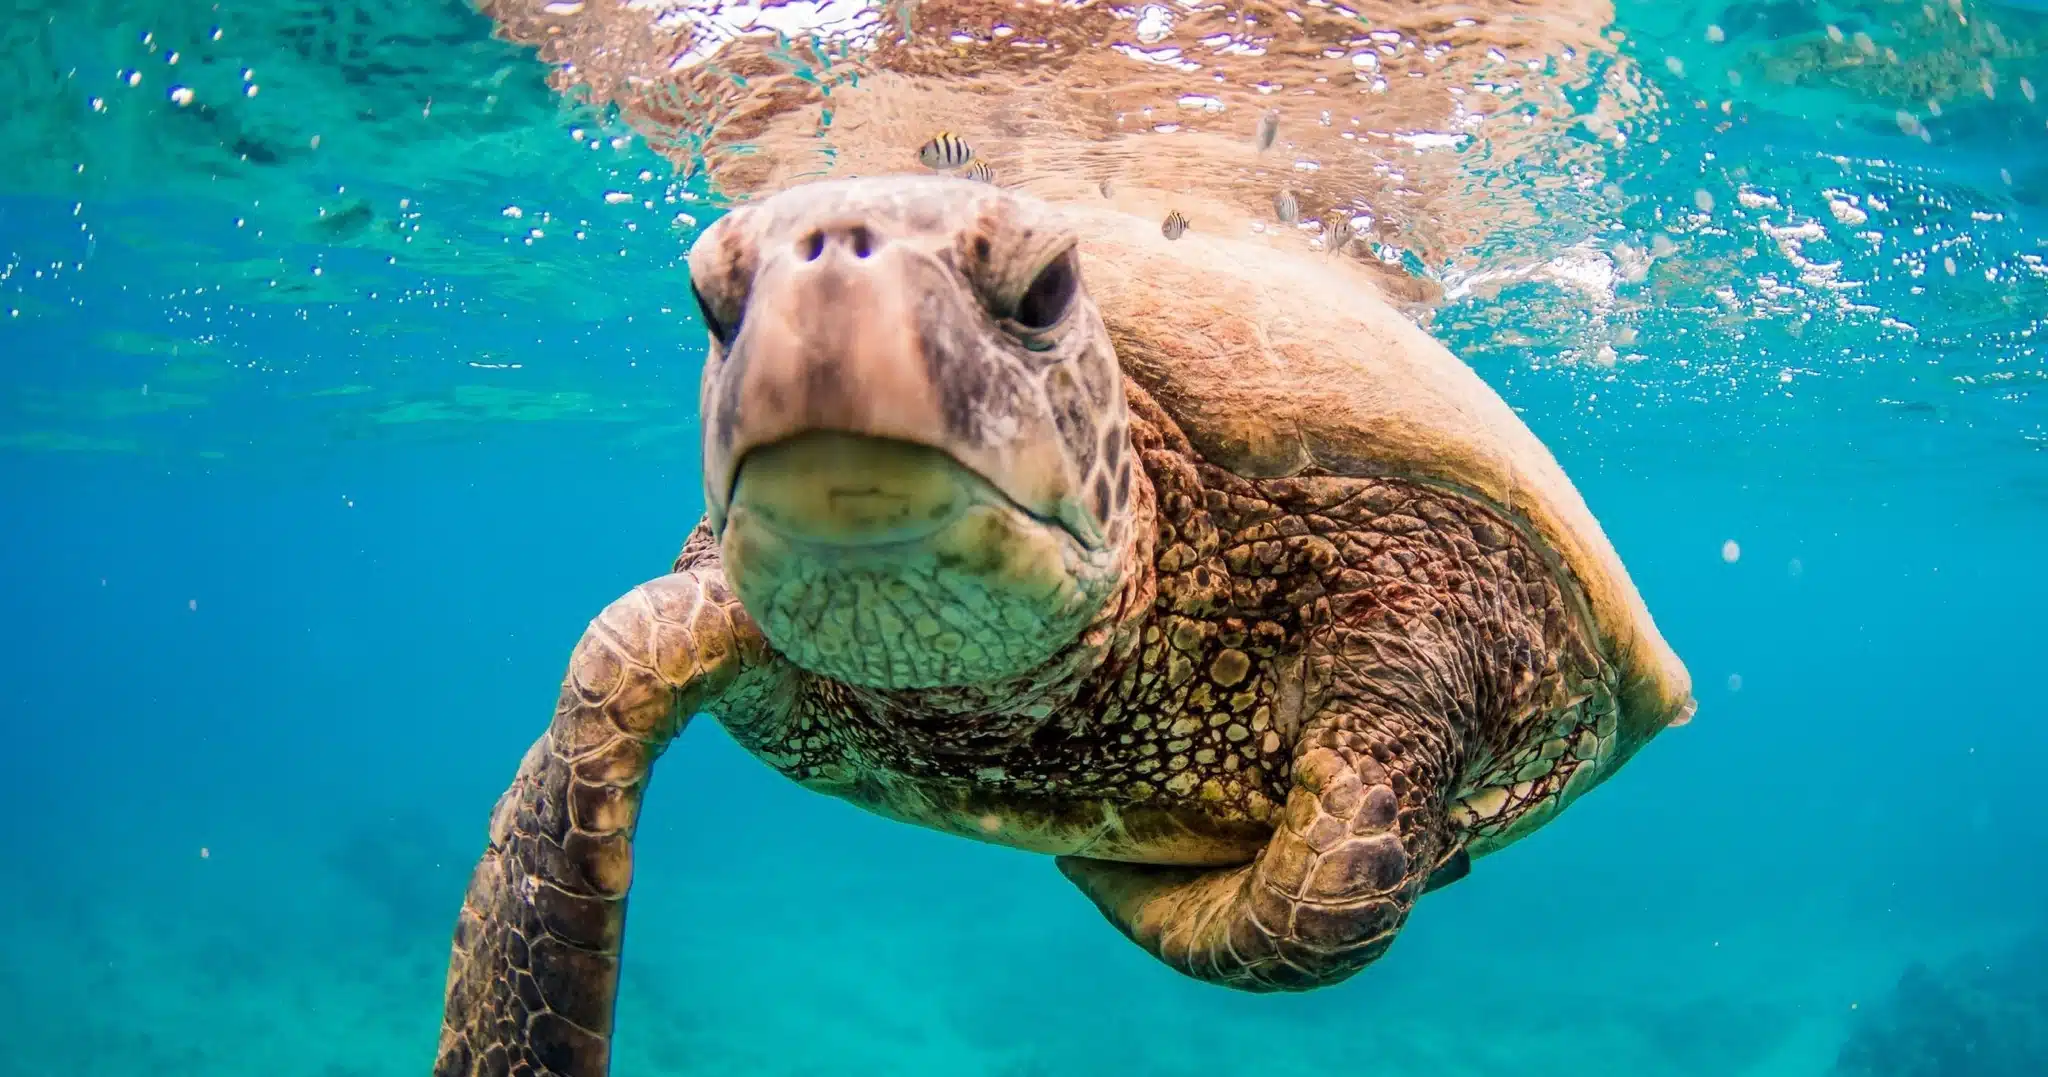 Afternoon Turtle Safari is a Water Activity located in the city of Waianae on Oahu, Hawaii